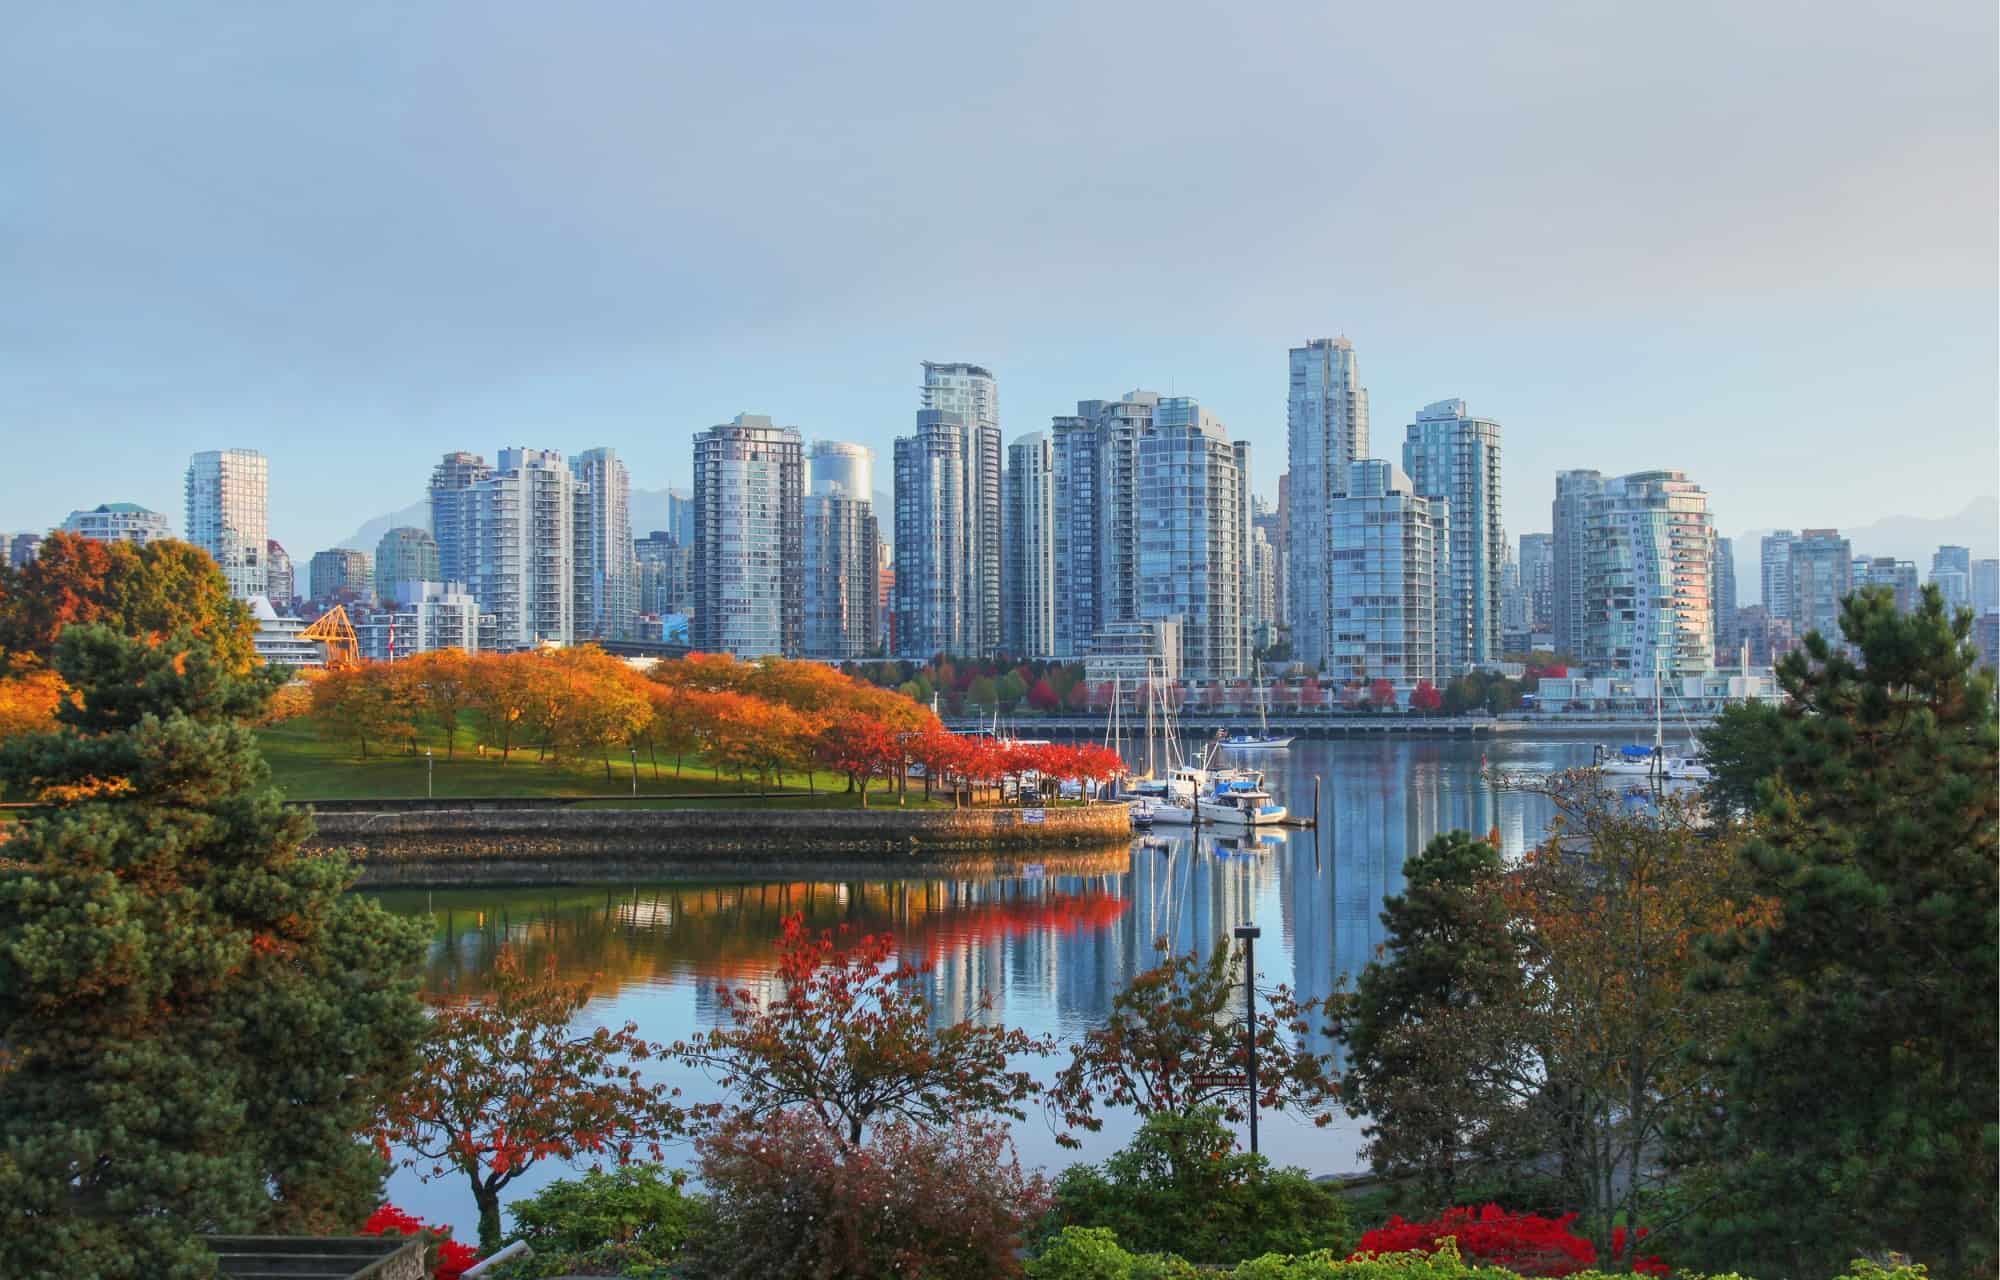 Top 10 Things to do in Vancouver, British Columbia for Families